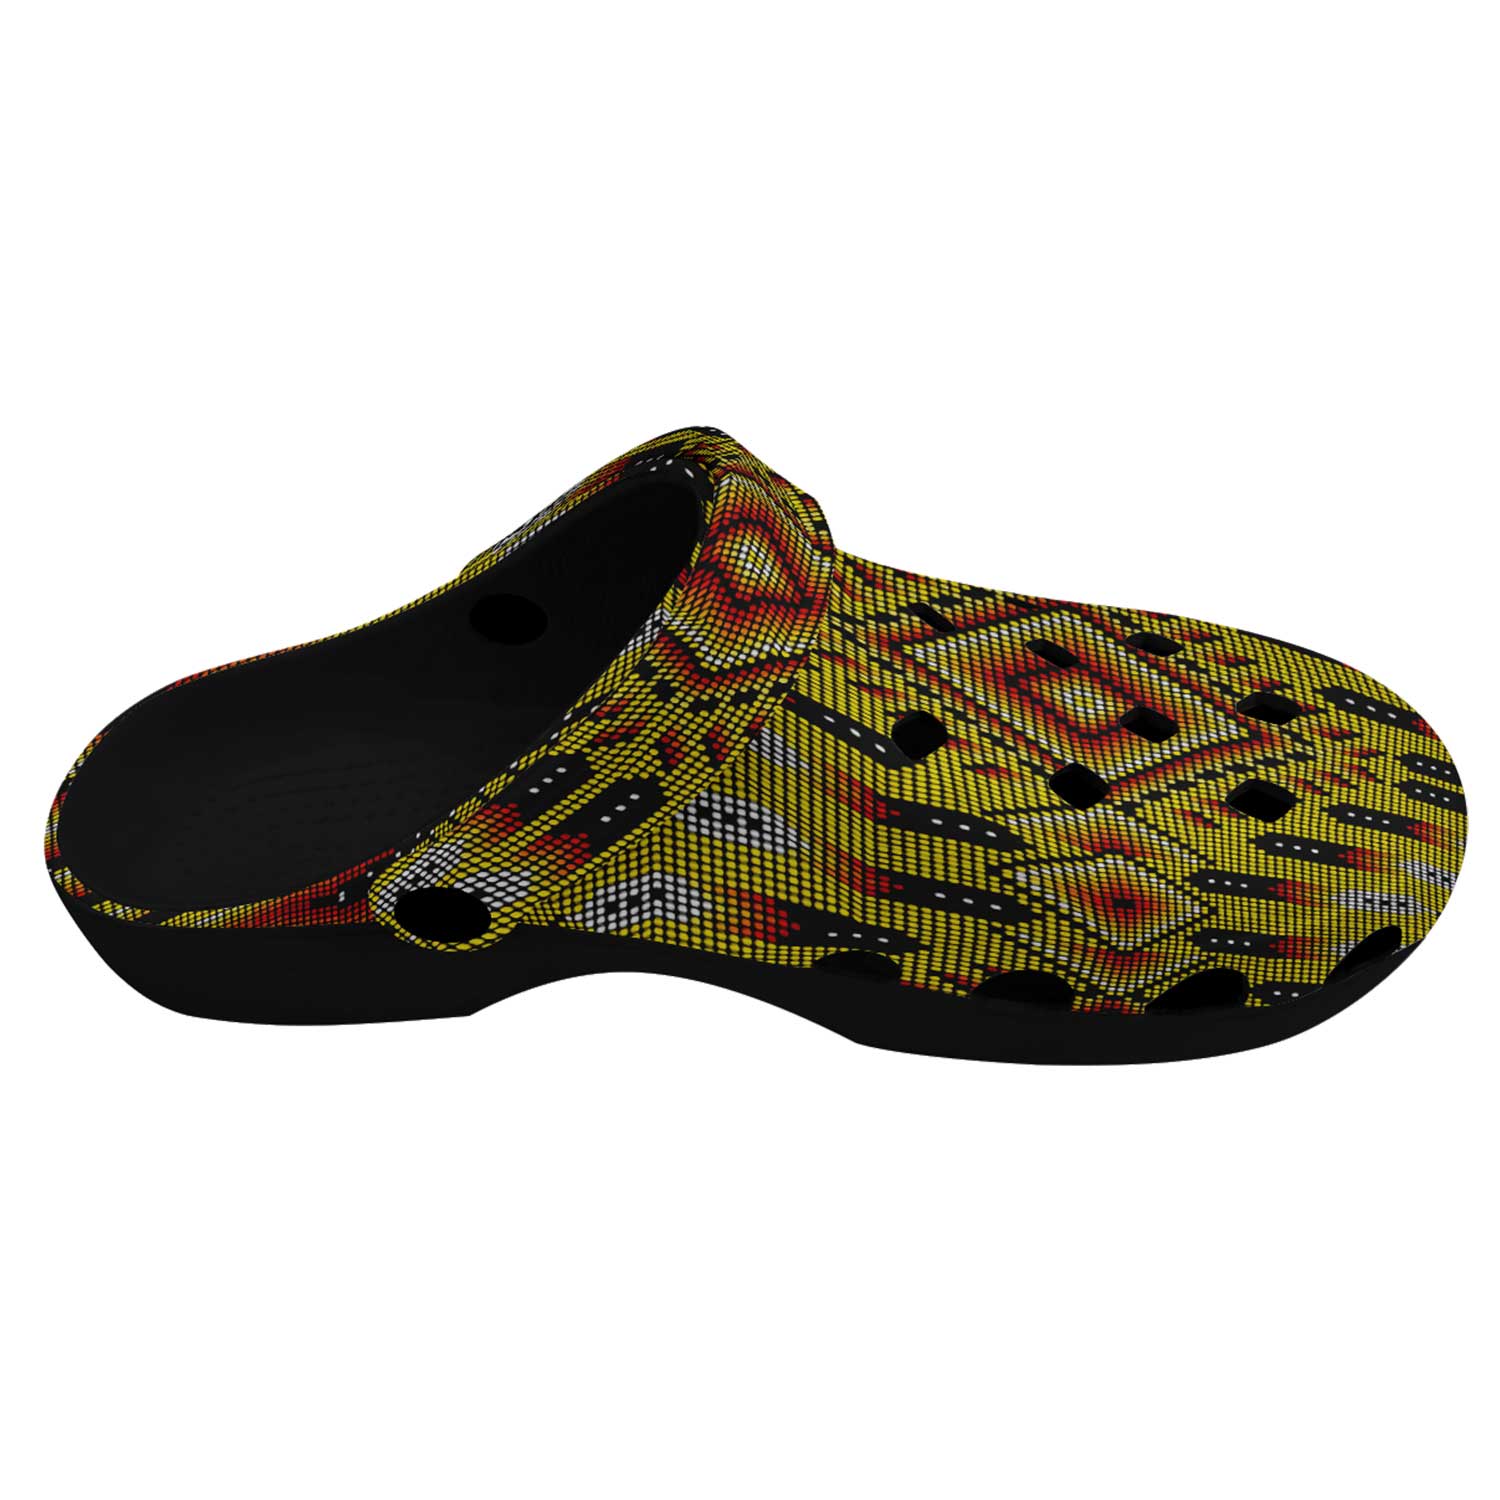 Fire Feather Yellow Muddies Unisex Clog Shoes